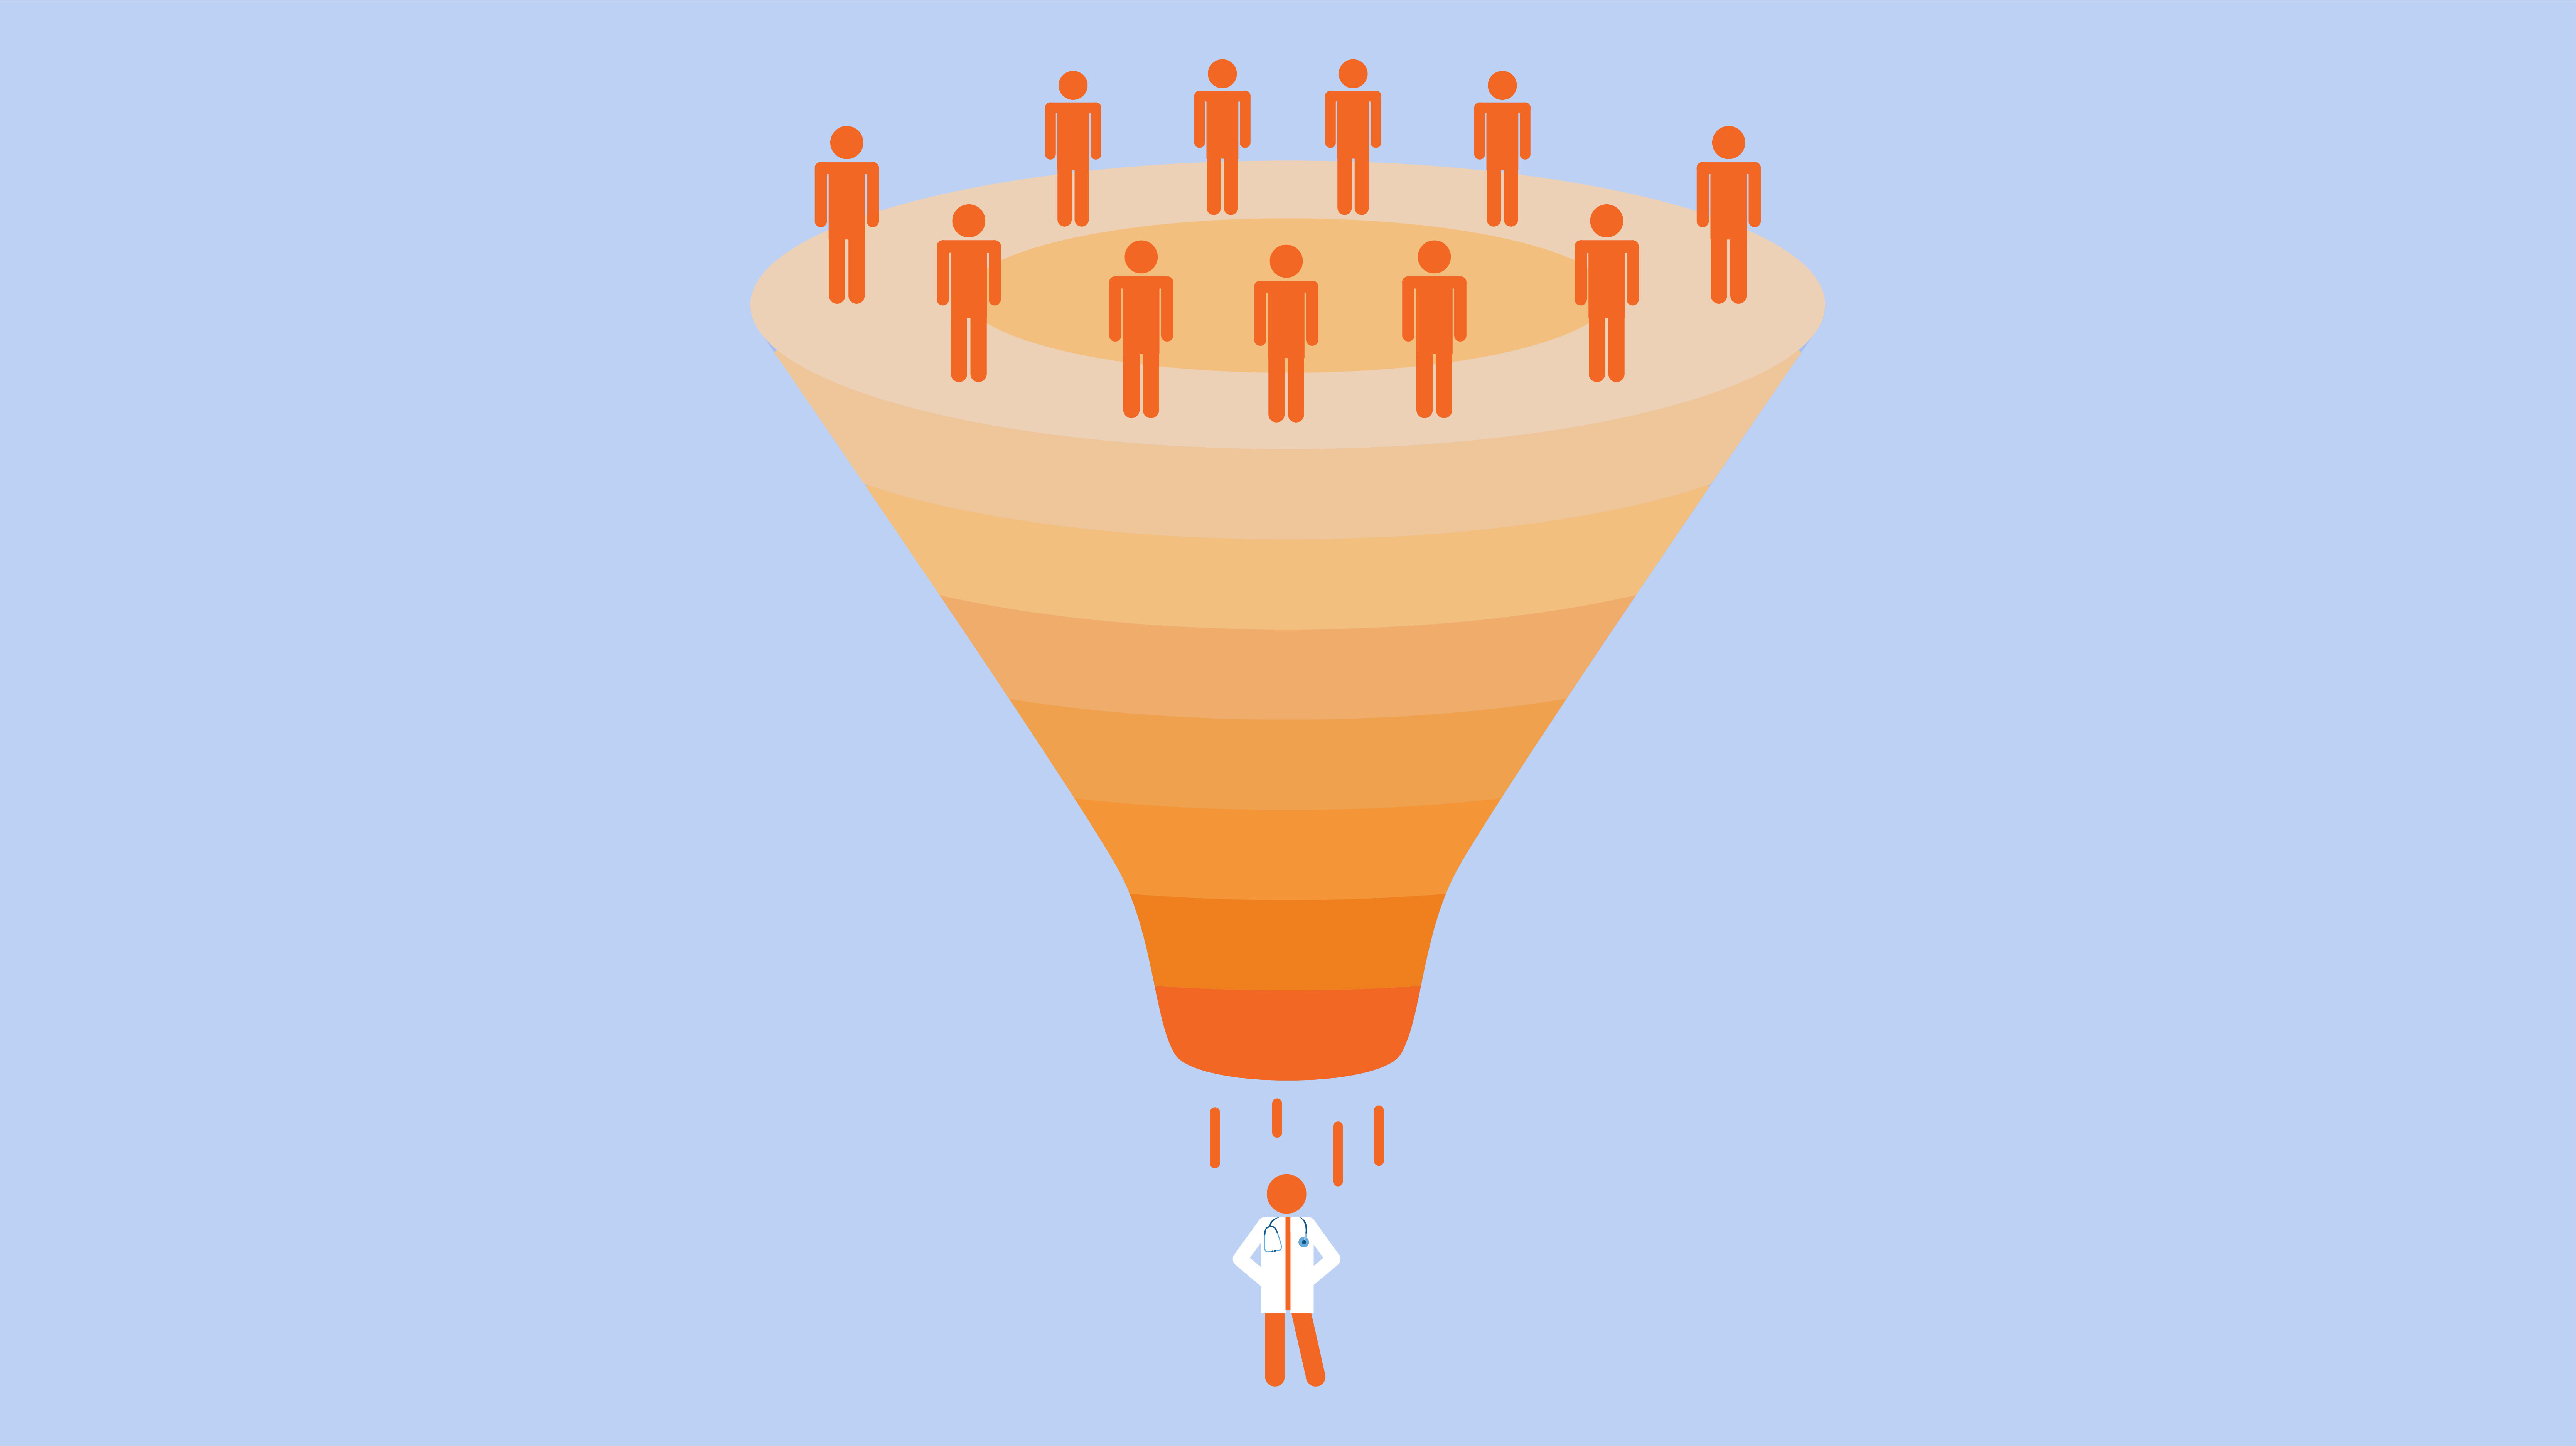 Find hard-to-reach, passive candidates and expand your recruitment funnel